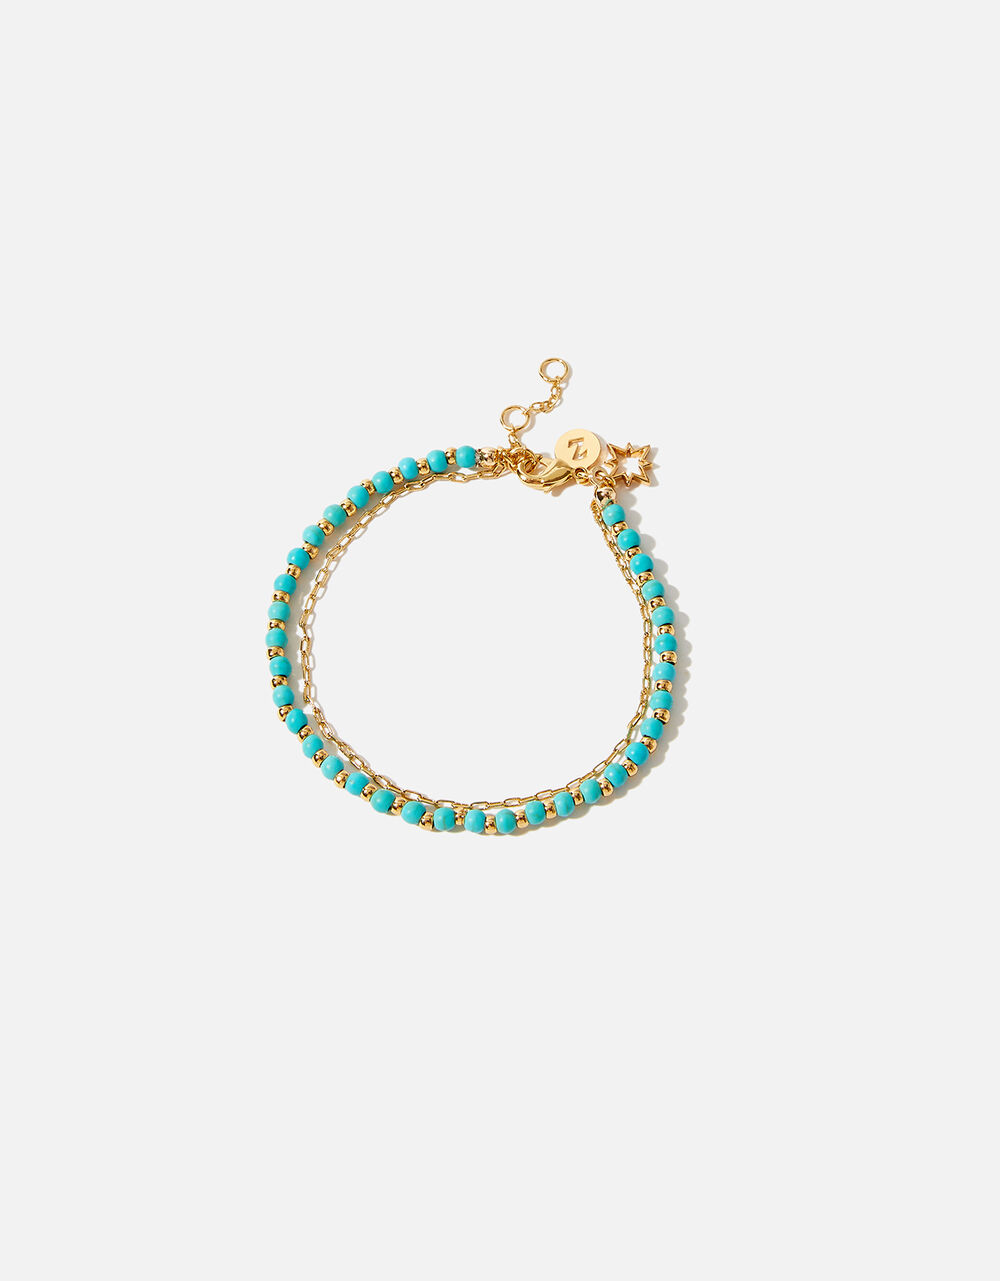 Gold-Plated Turquoise Bead Bracelet | Z for Accessorize | Accessorize UK